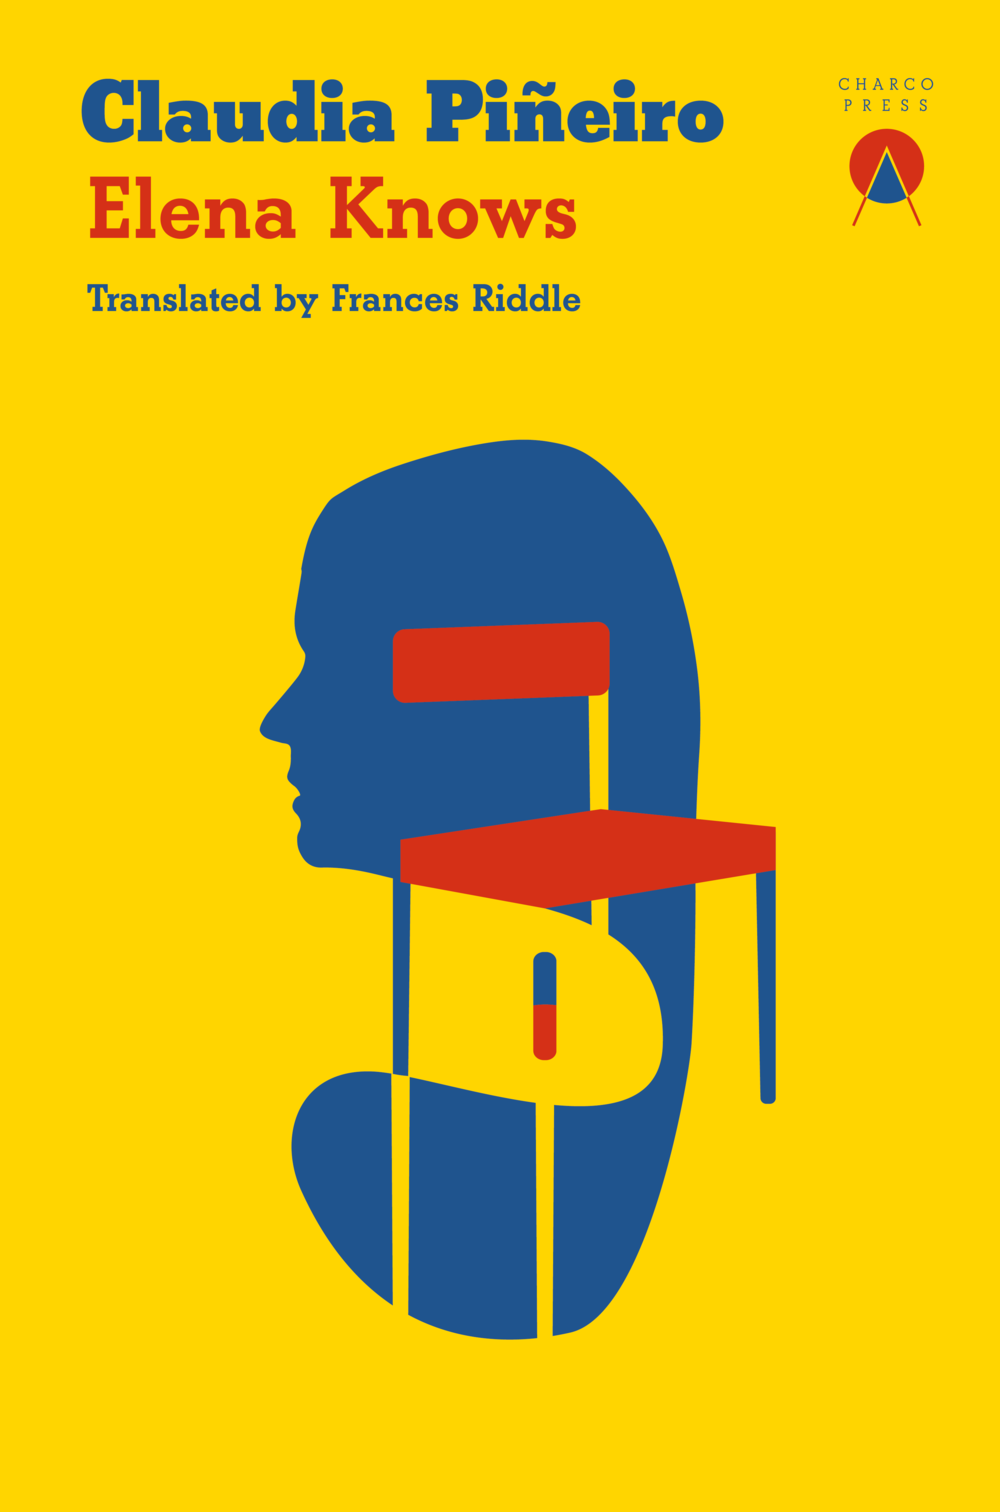 Elena Knows by Claudia Piñeiro, translated by Frances Riddle